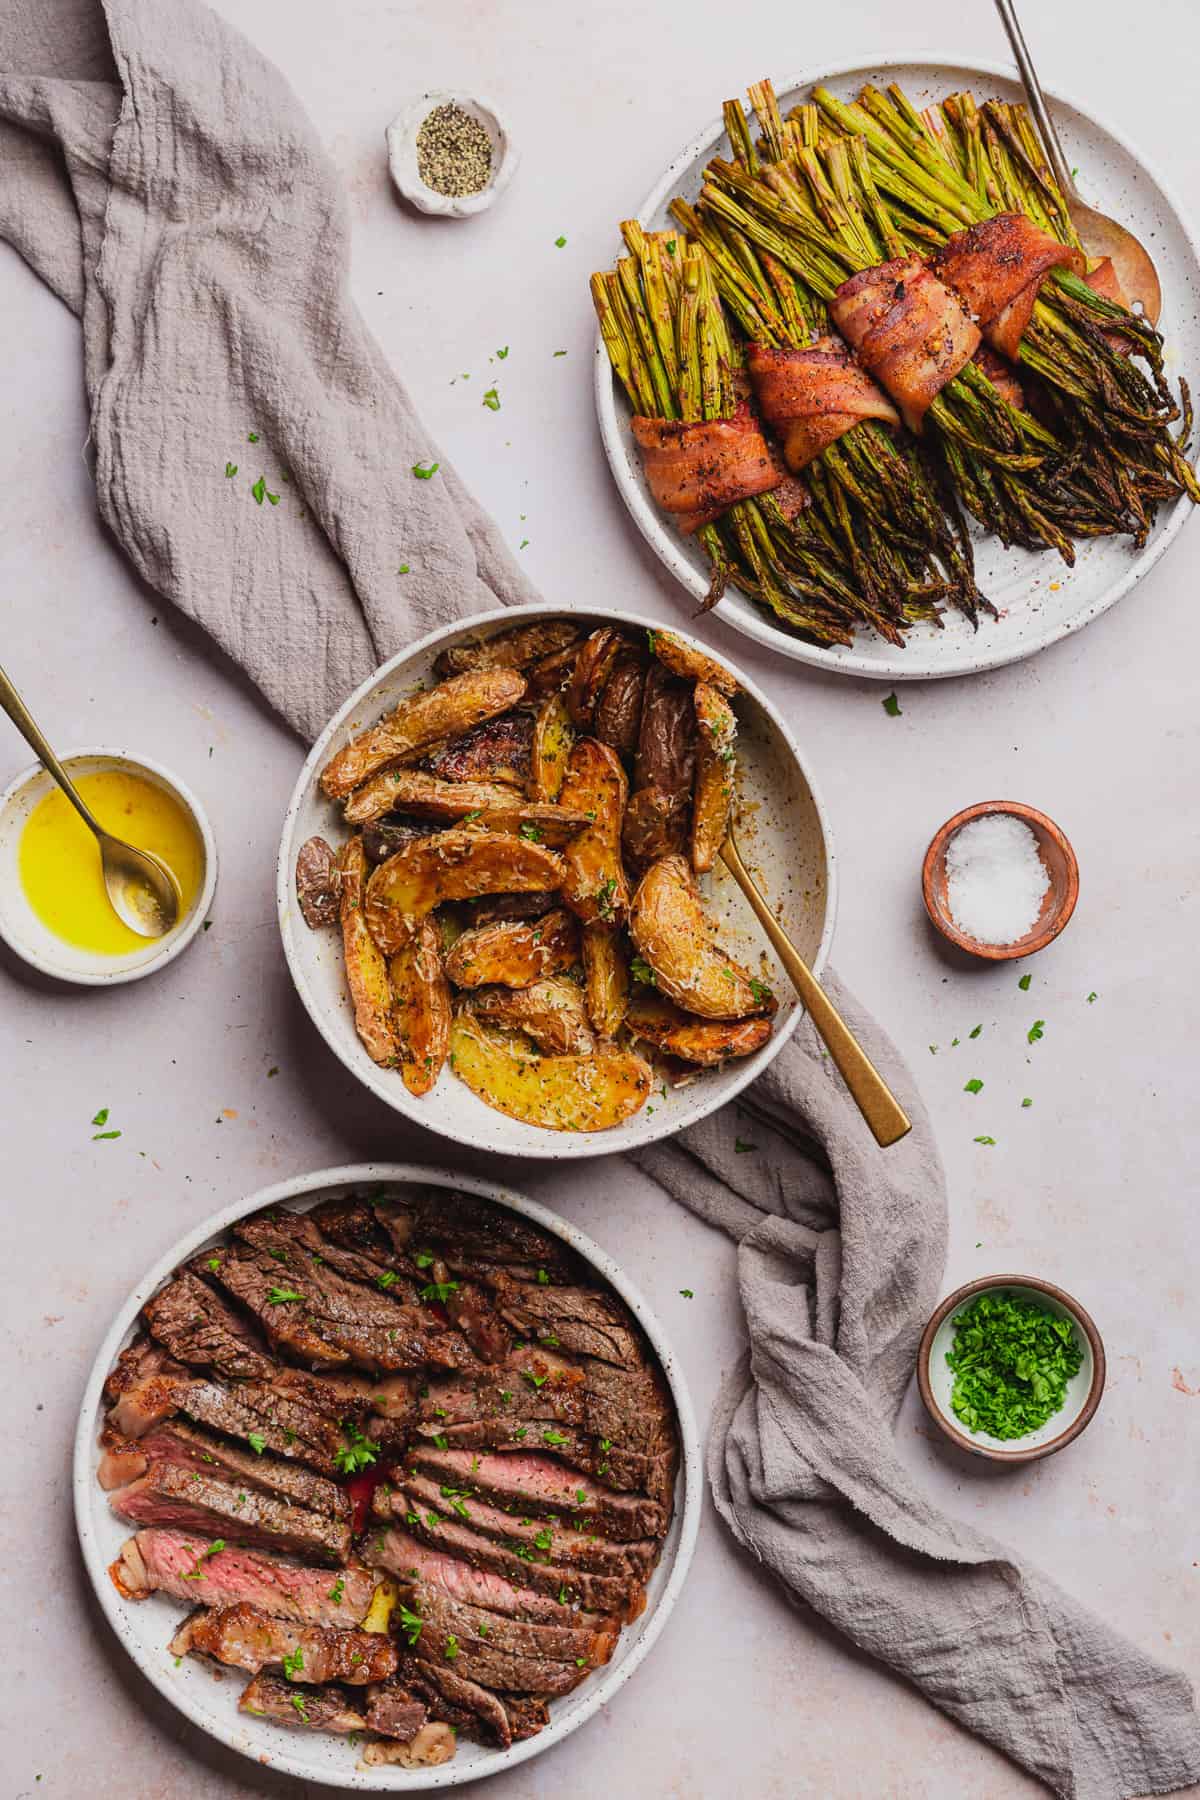 air fryer fingerling potatoes with bacon wrapped asparagus bundles and ribeye steak